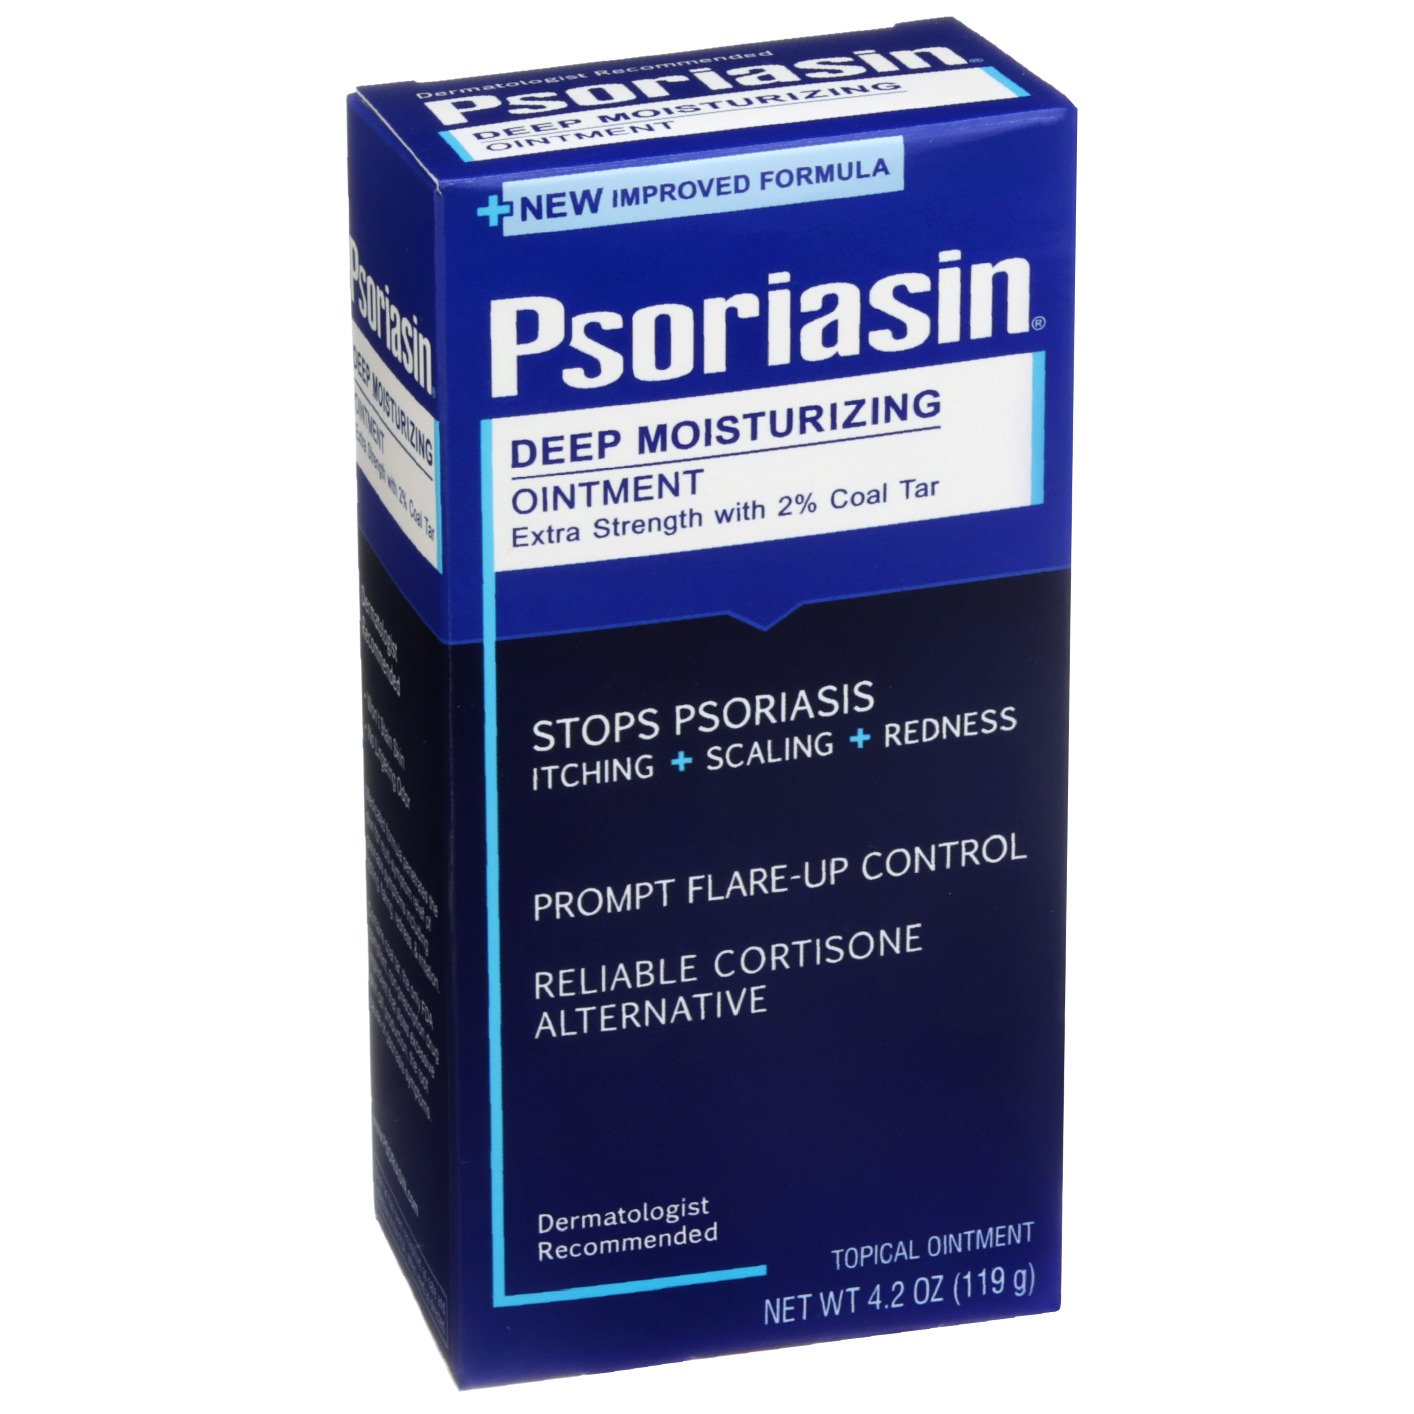 psoriasin ointment side effects